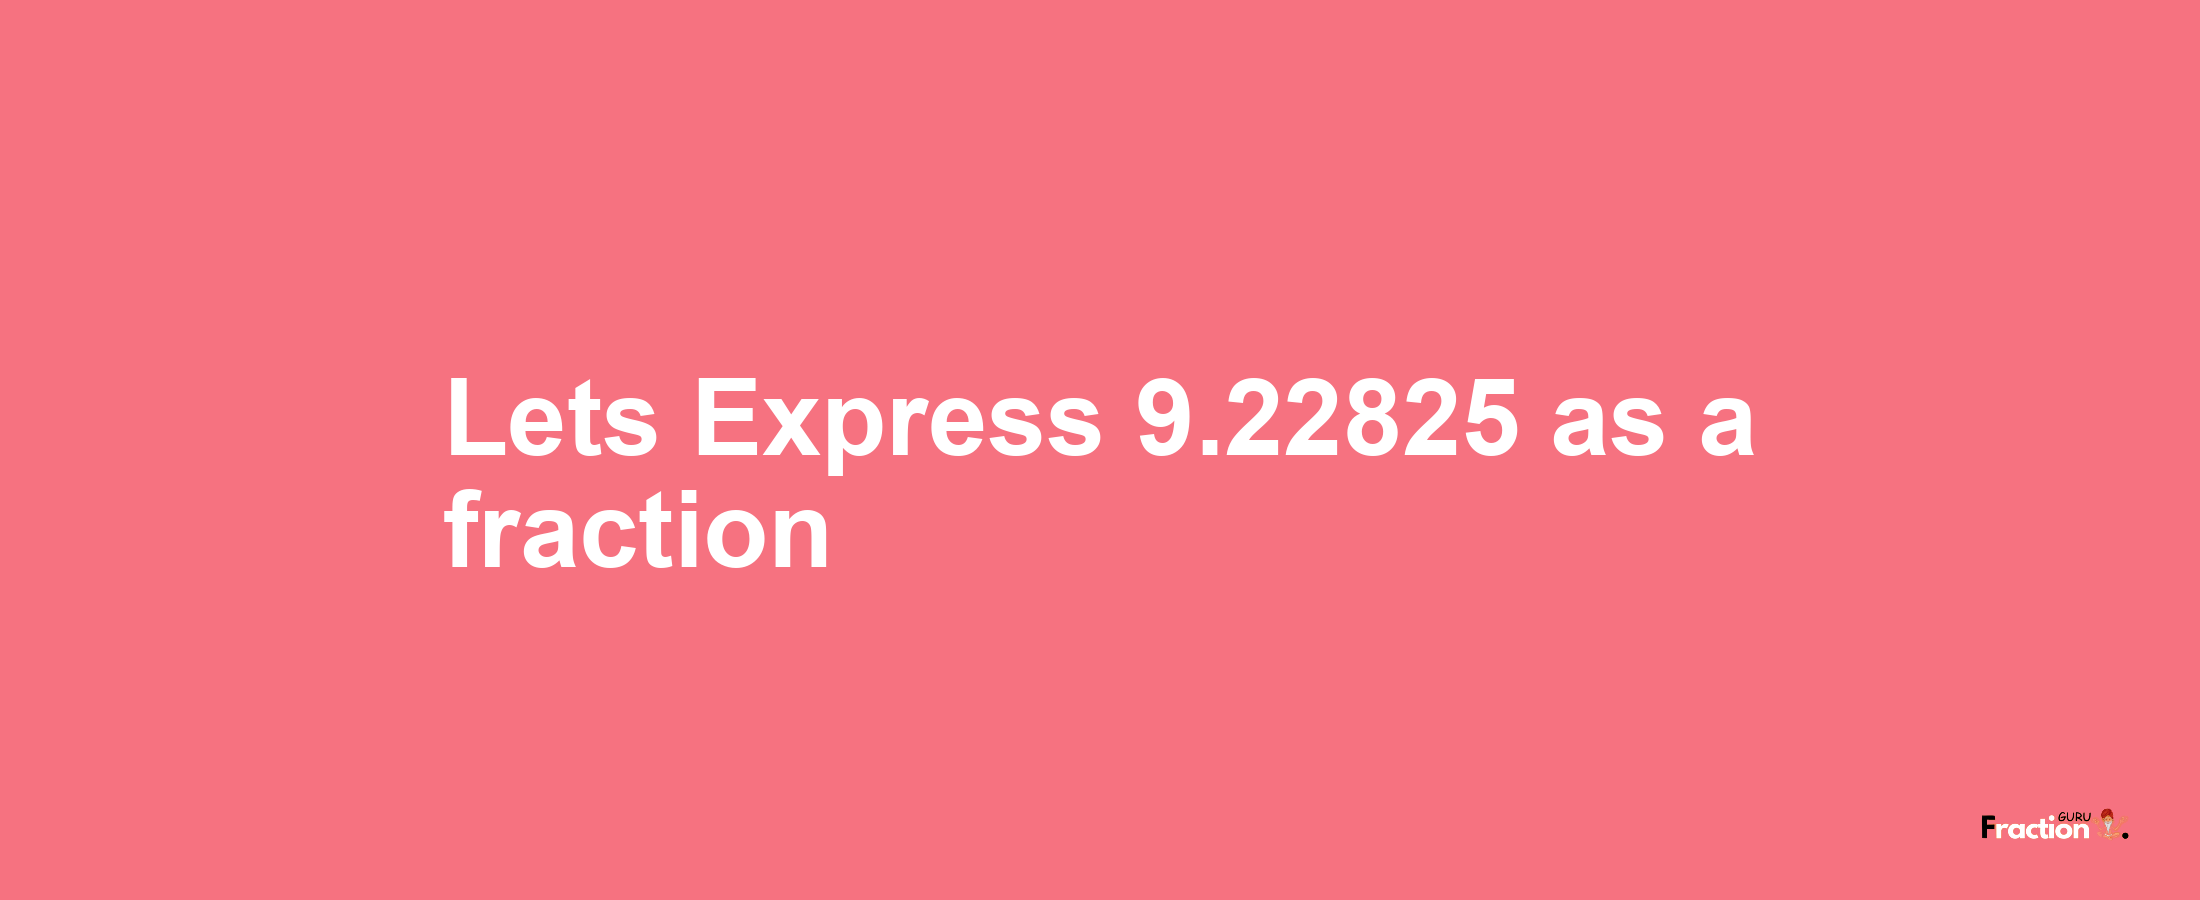 Lets Express 9.22825 as afraction